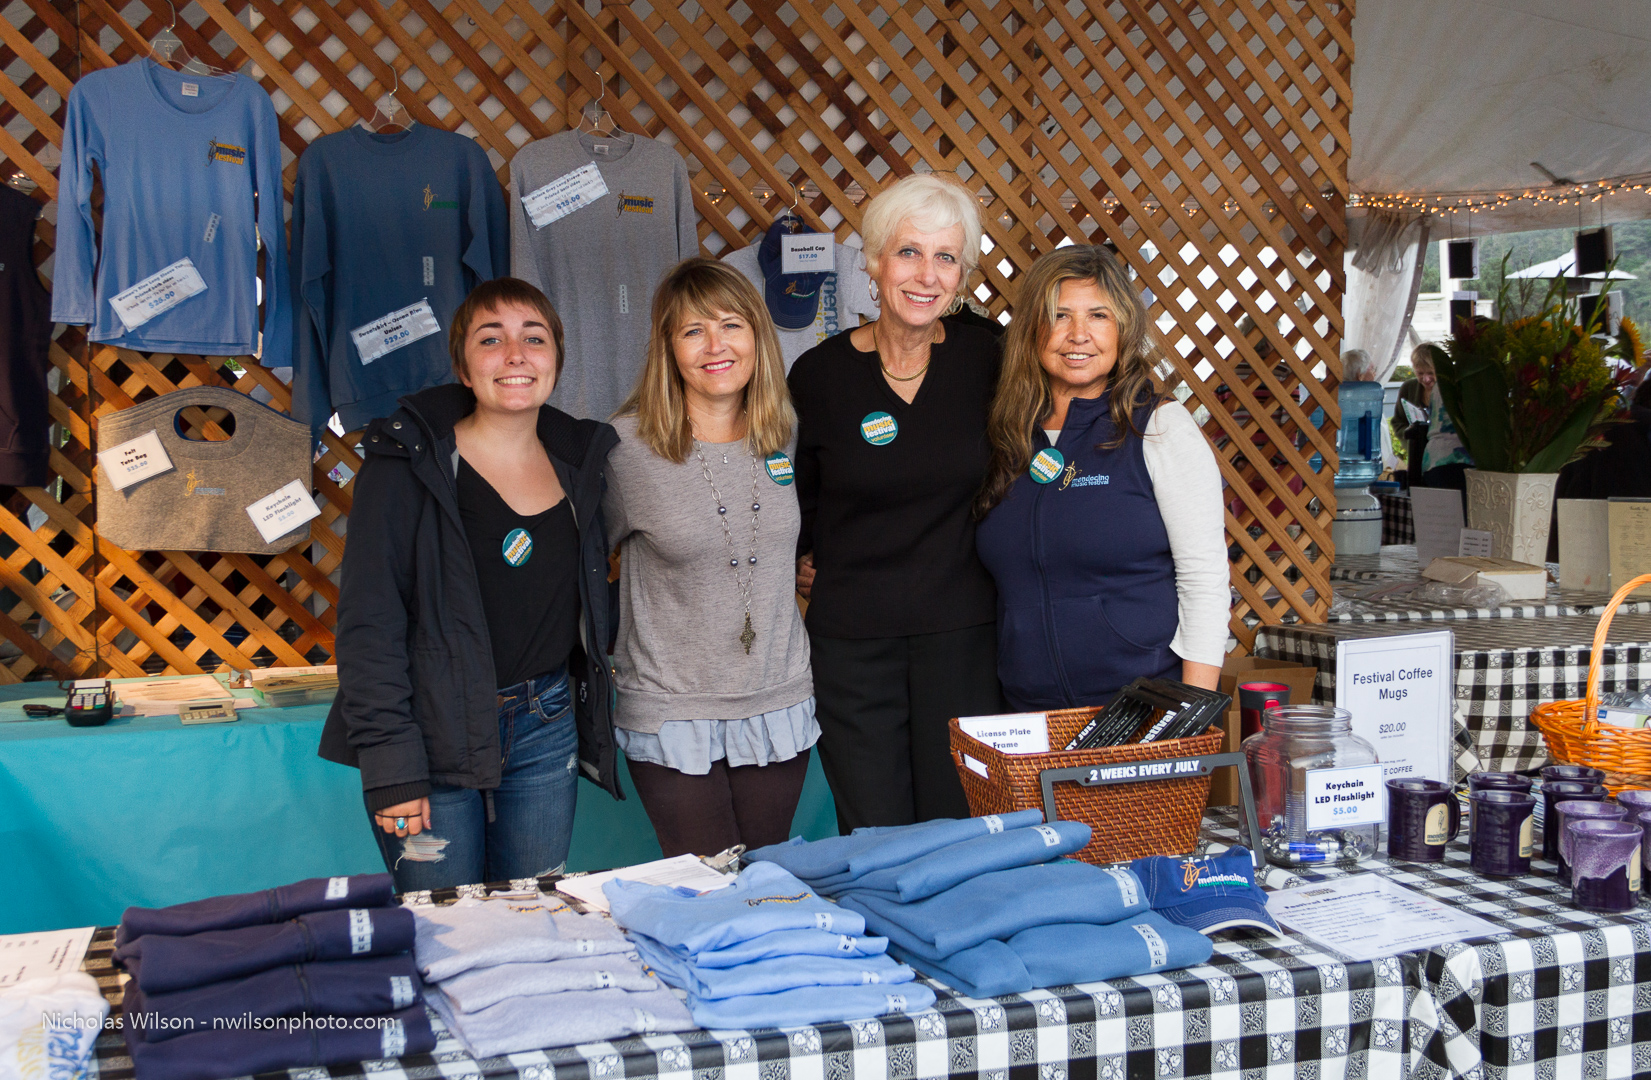 Leona Walden and Sally Stewart with two other volunteers in the festival merchandise booth.